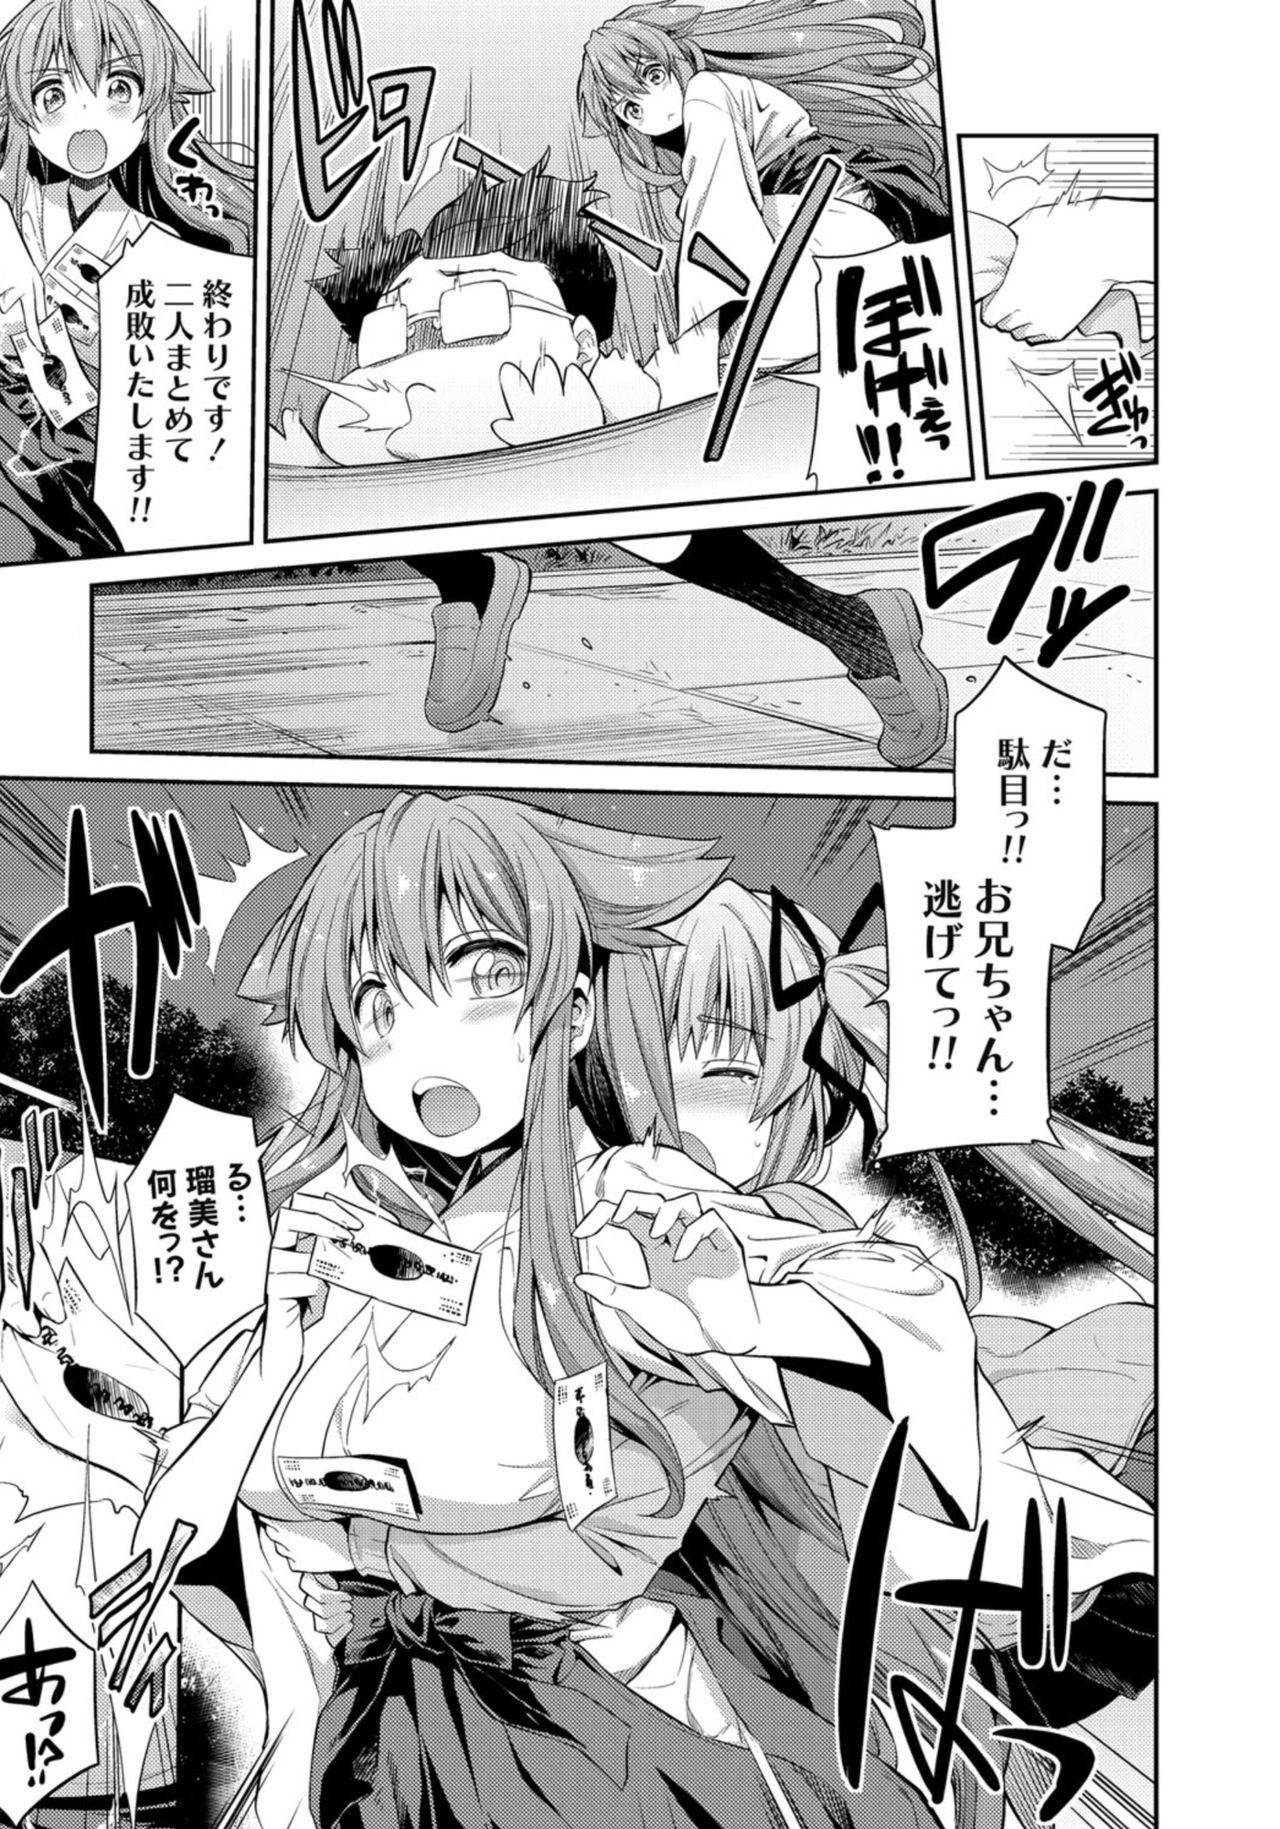 Para 憑りつき×乗っ取り×孕ませろ！肆憑き 〜ドロリ濃厚！退魔巫女種付けレイプ！〜 Free Amateur - Page 3